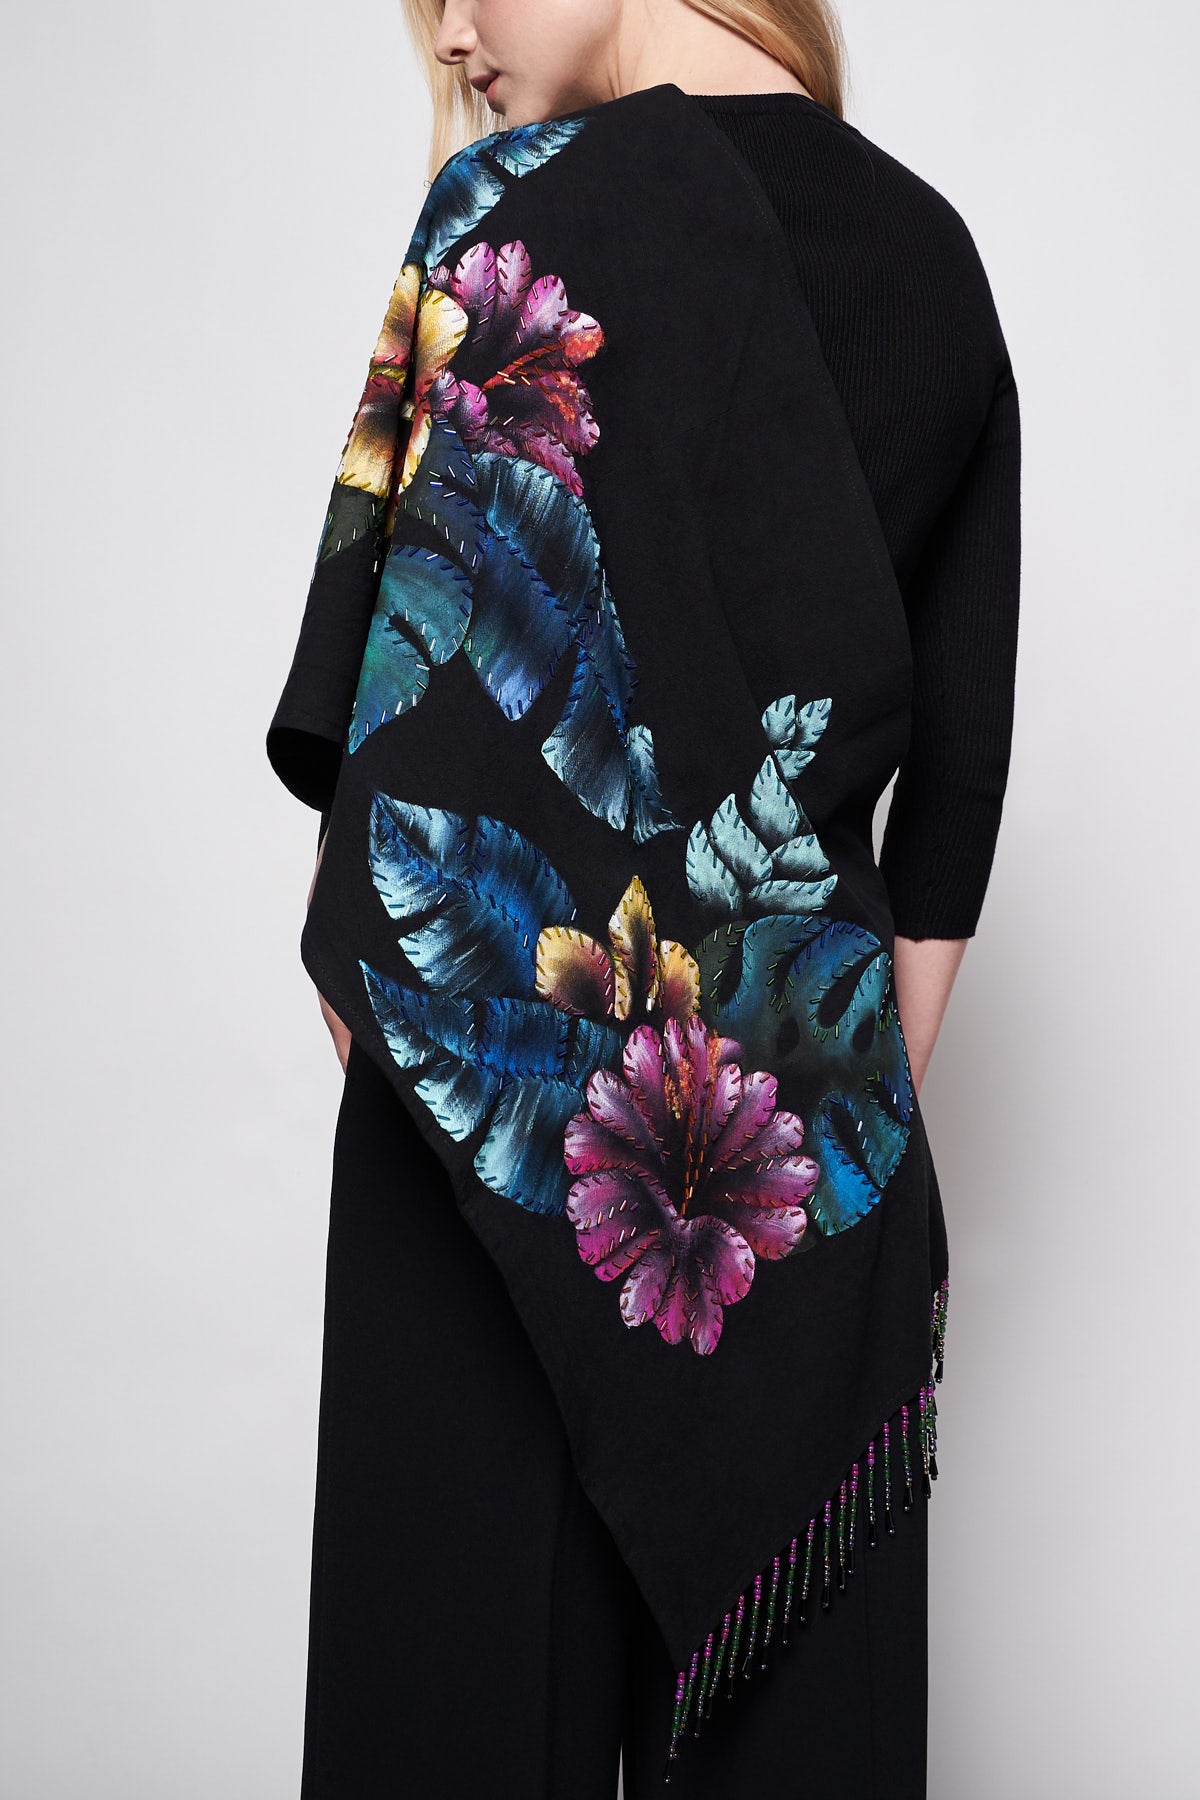 HAND-PAINTED AND HAND-EMBROIDERED SHAWL WITH BEADED FRINGE - FLORES